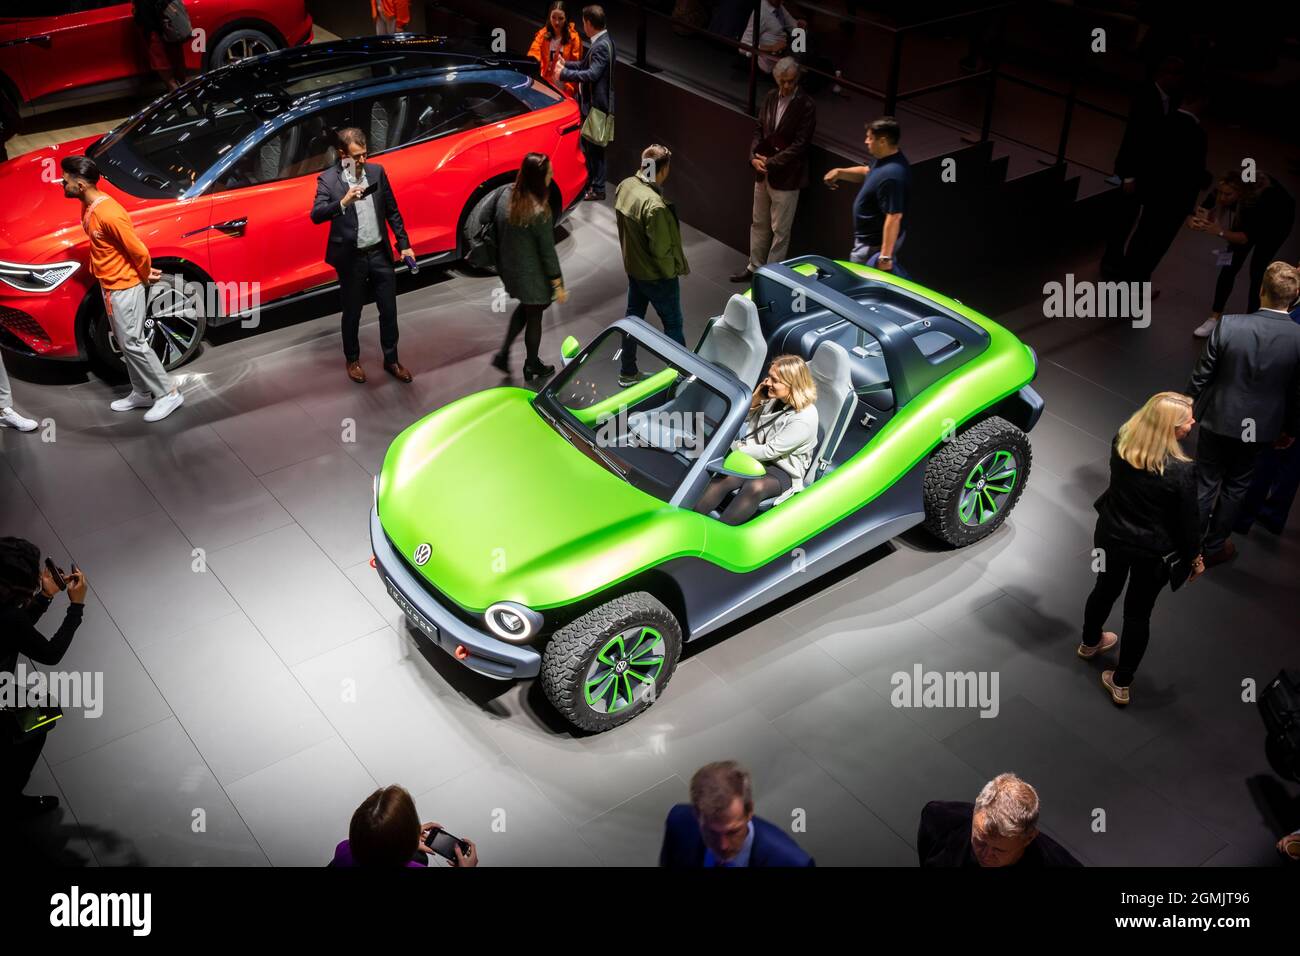 Volkswagen I.D. Buggy electric car showcased at the Frankfurt IAA Motor Show. Germany - September 10, 2019 Stock Photo